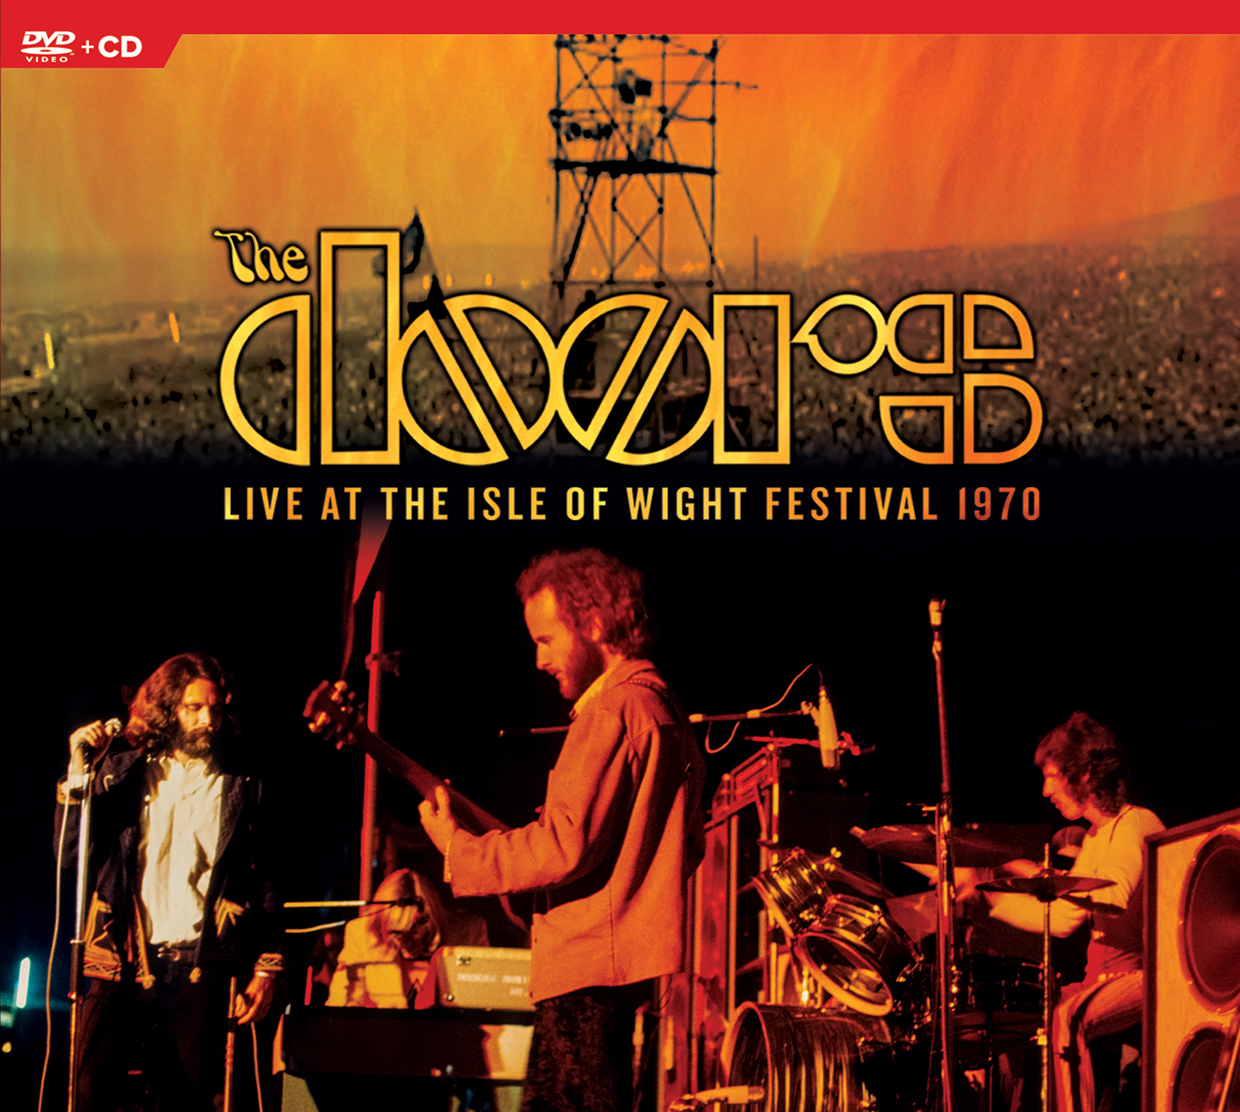 The Doors Live At The Isle of Wight 1970